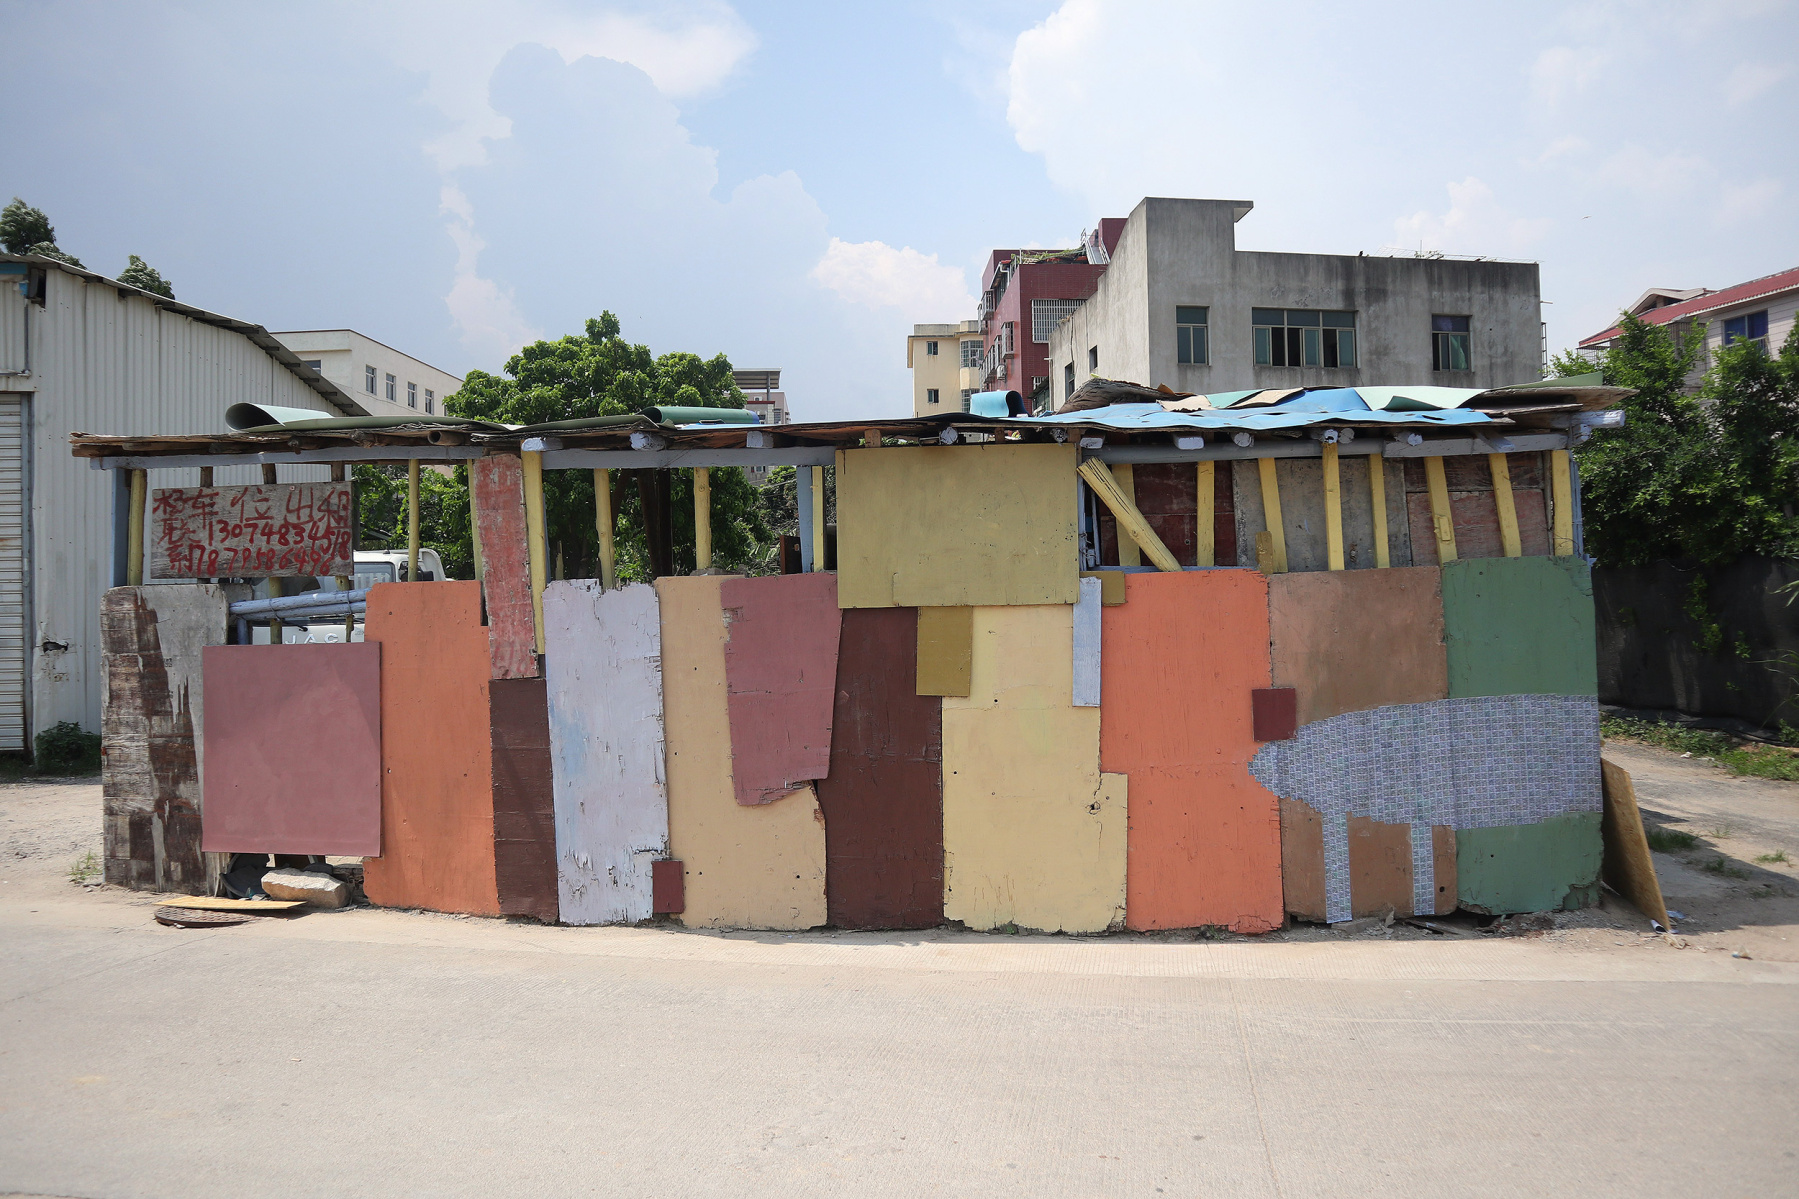 The Paint Project (a cooperative project with local children), Gangtou Village, Xiamen, China